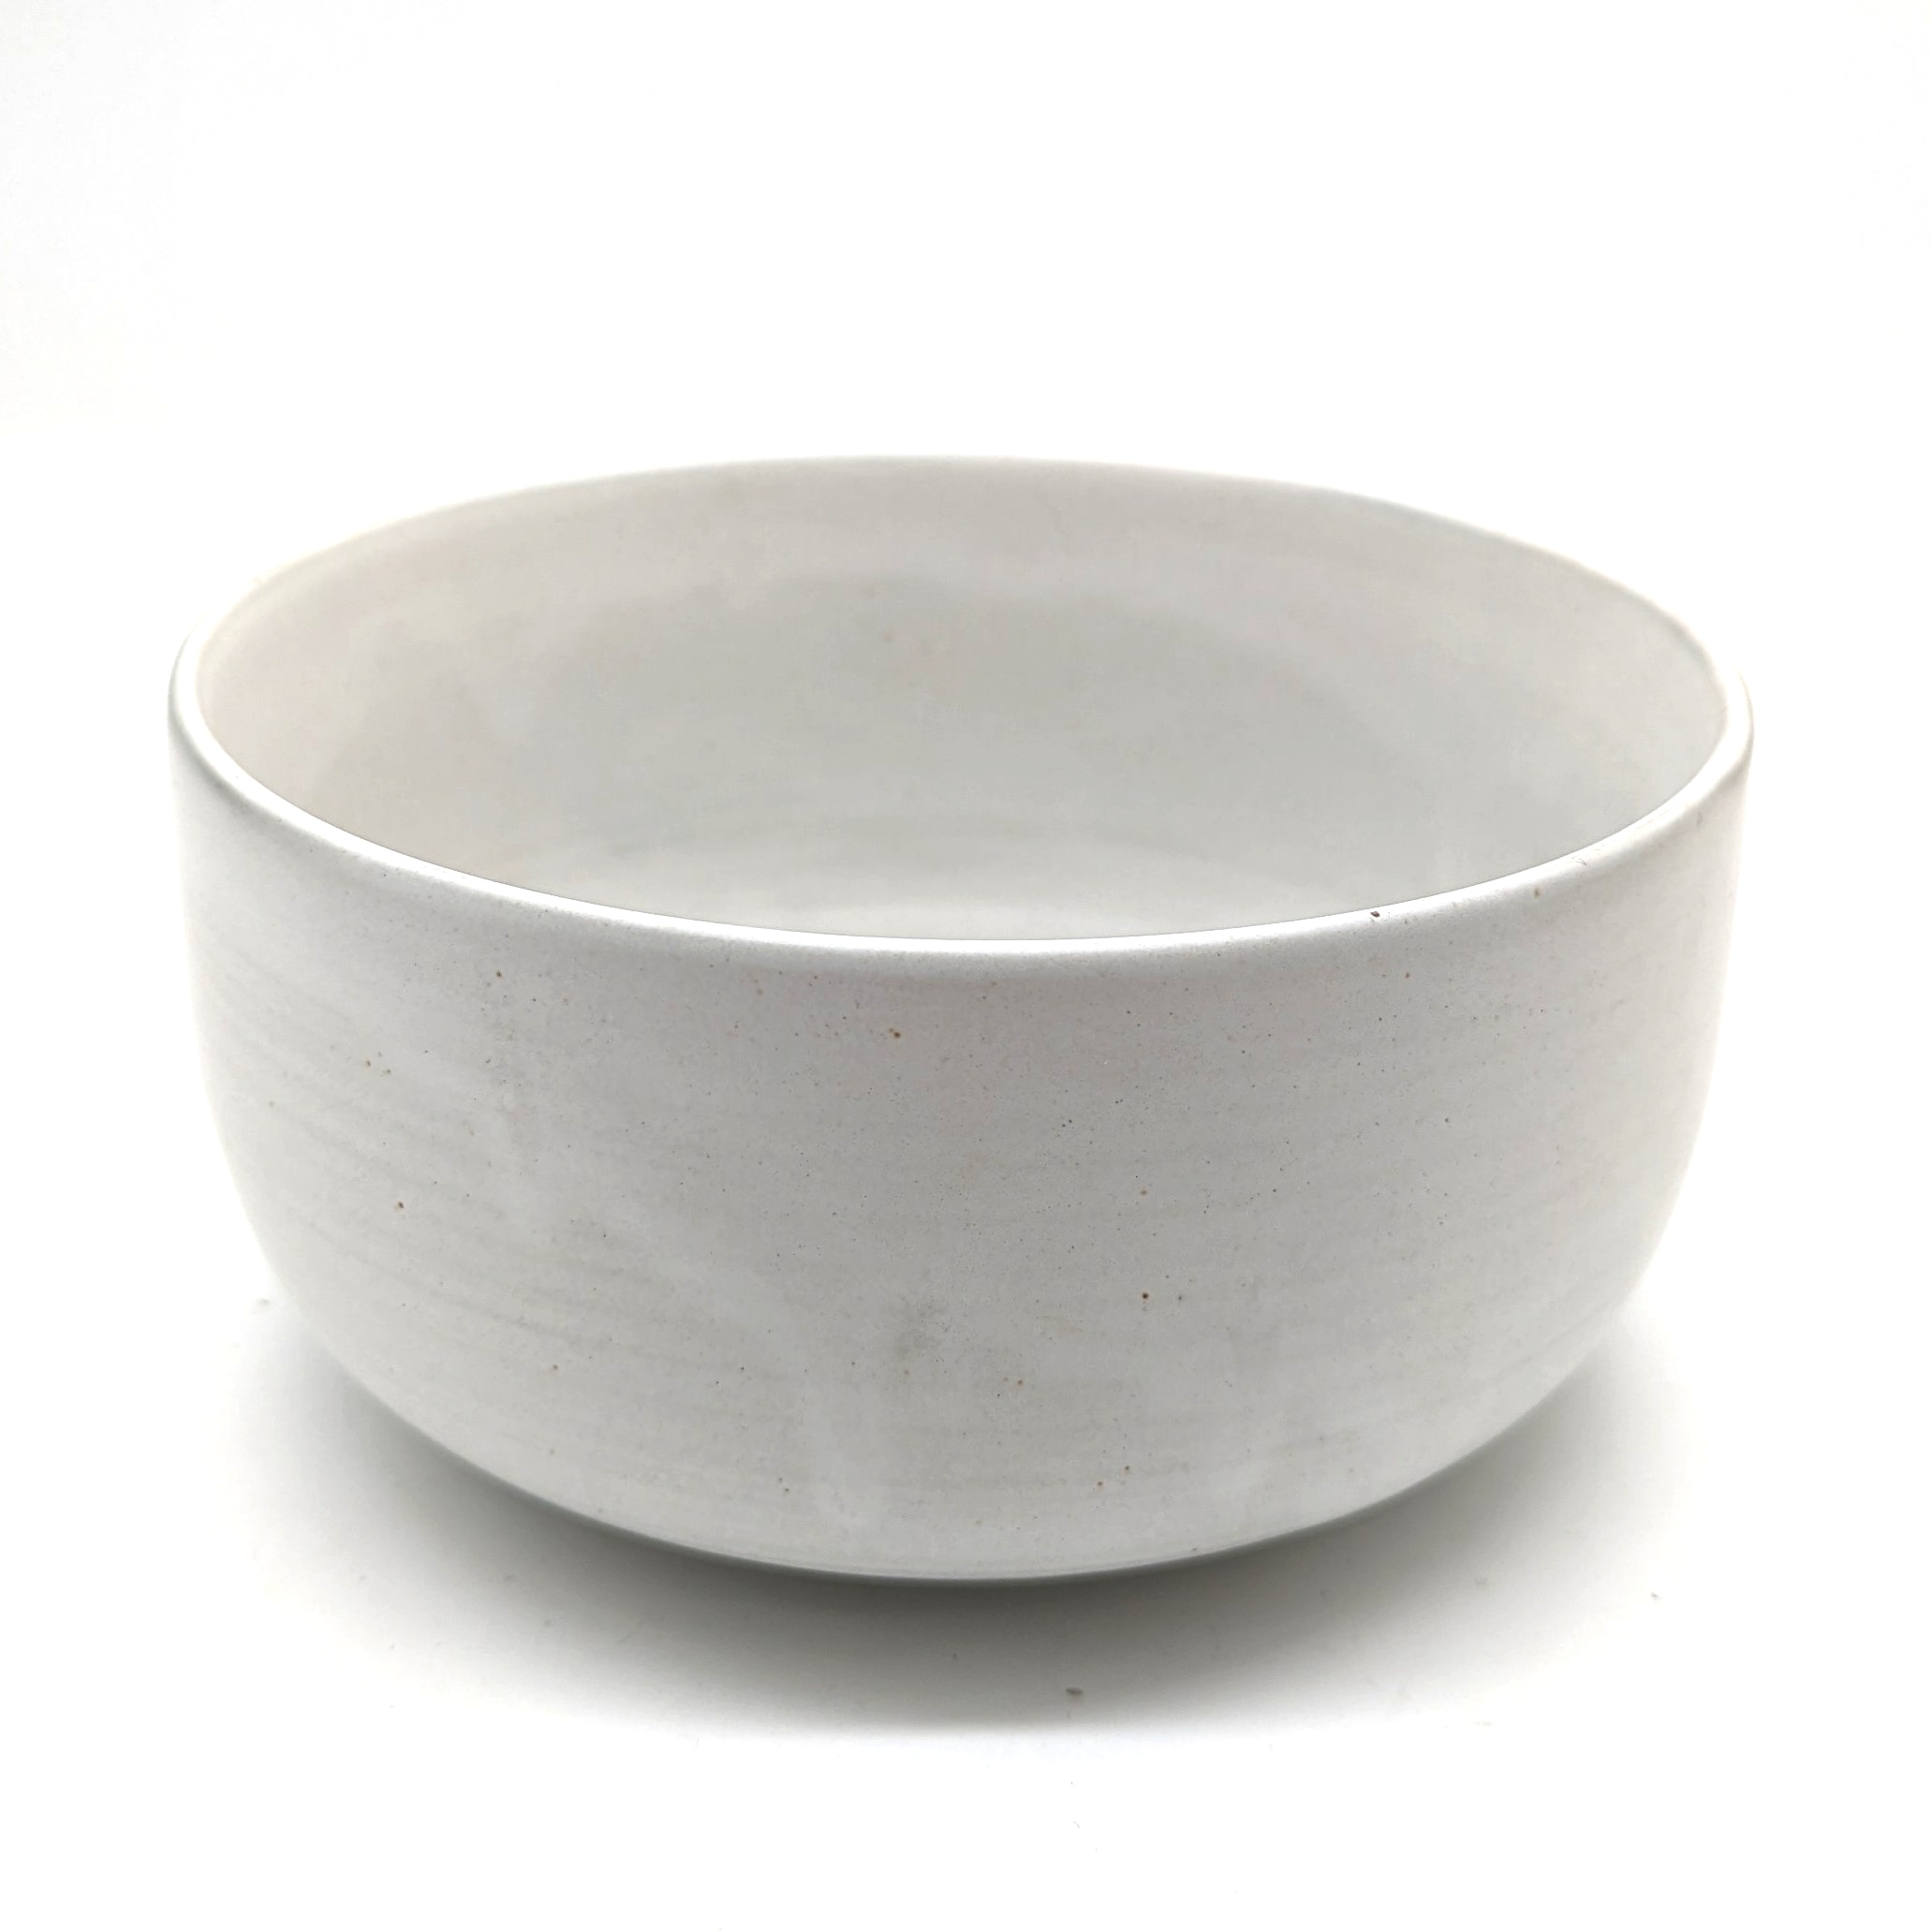 Hubsch Large White Clay Bowl - Large